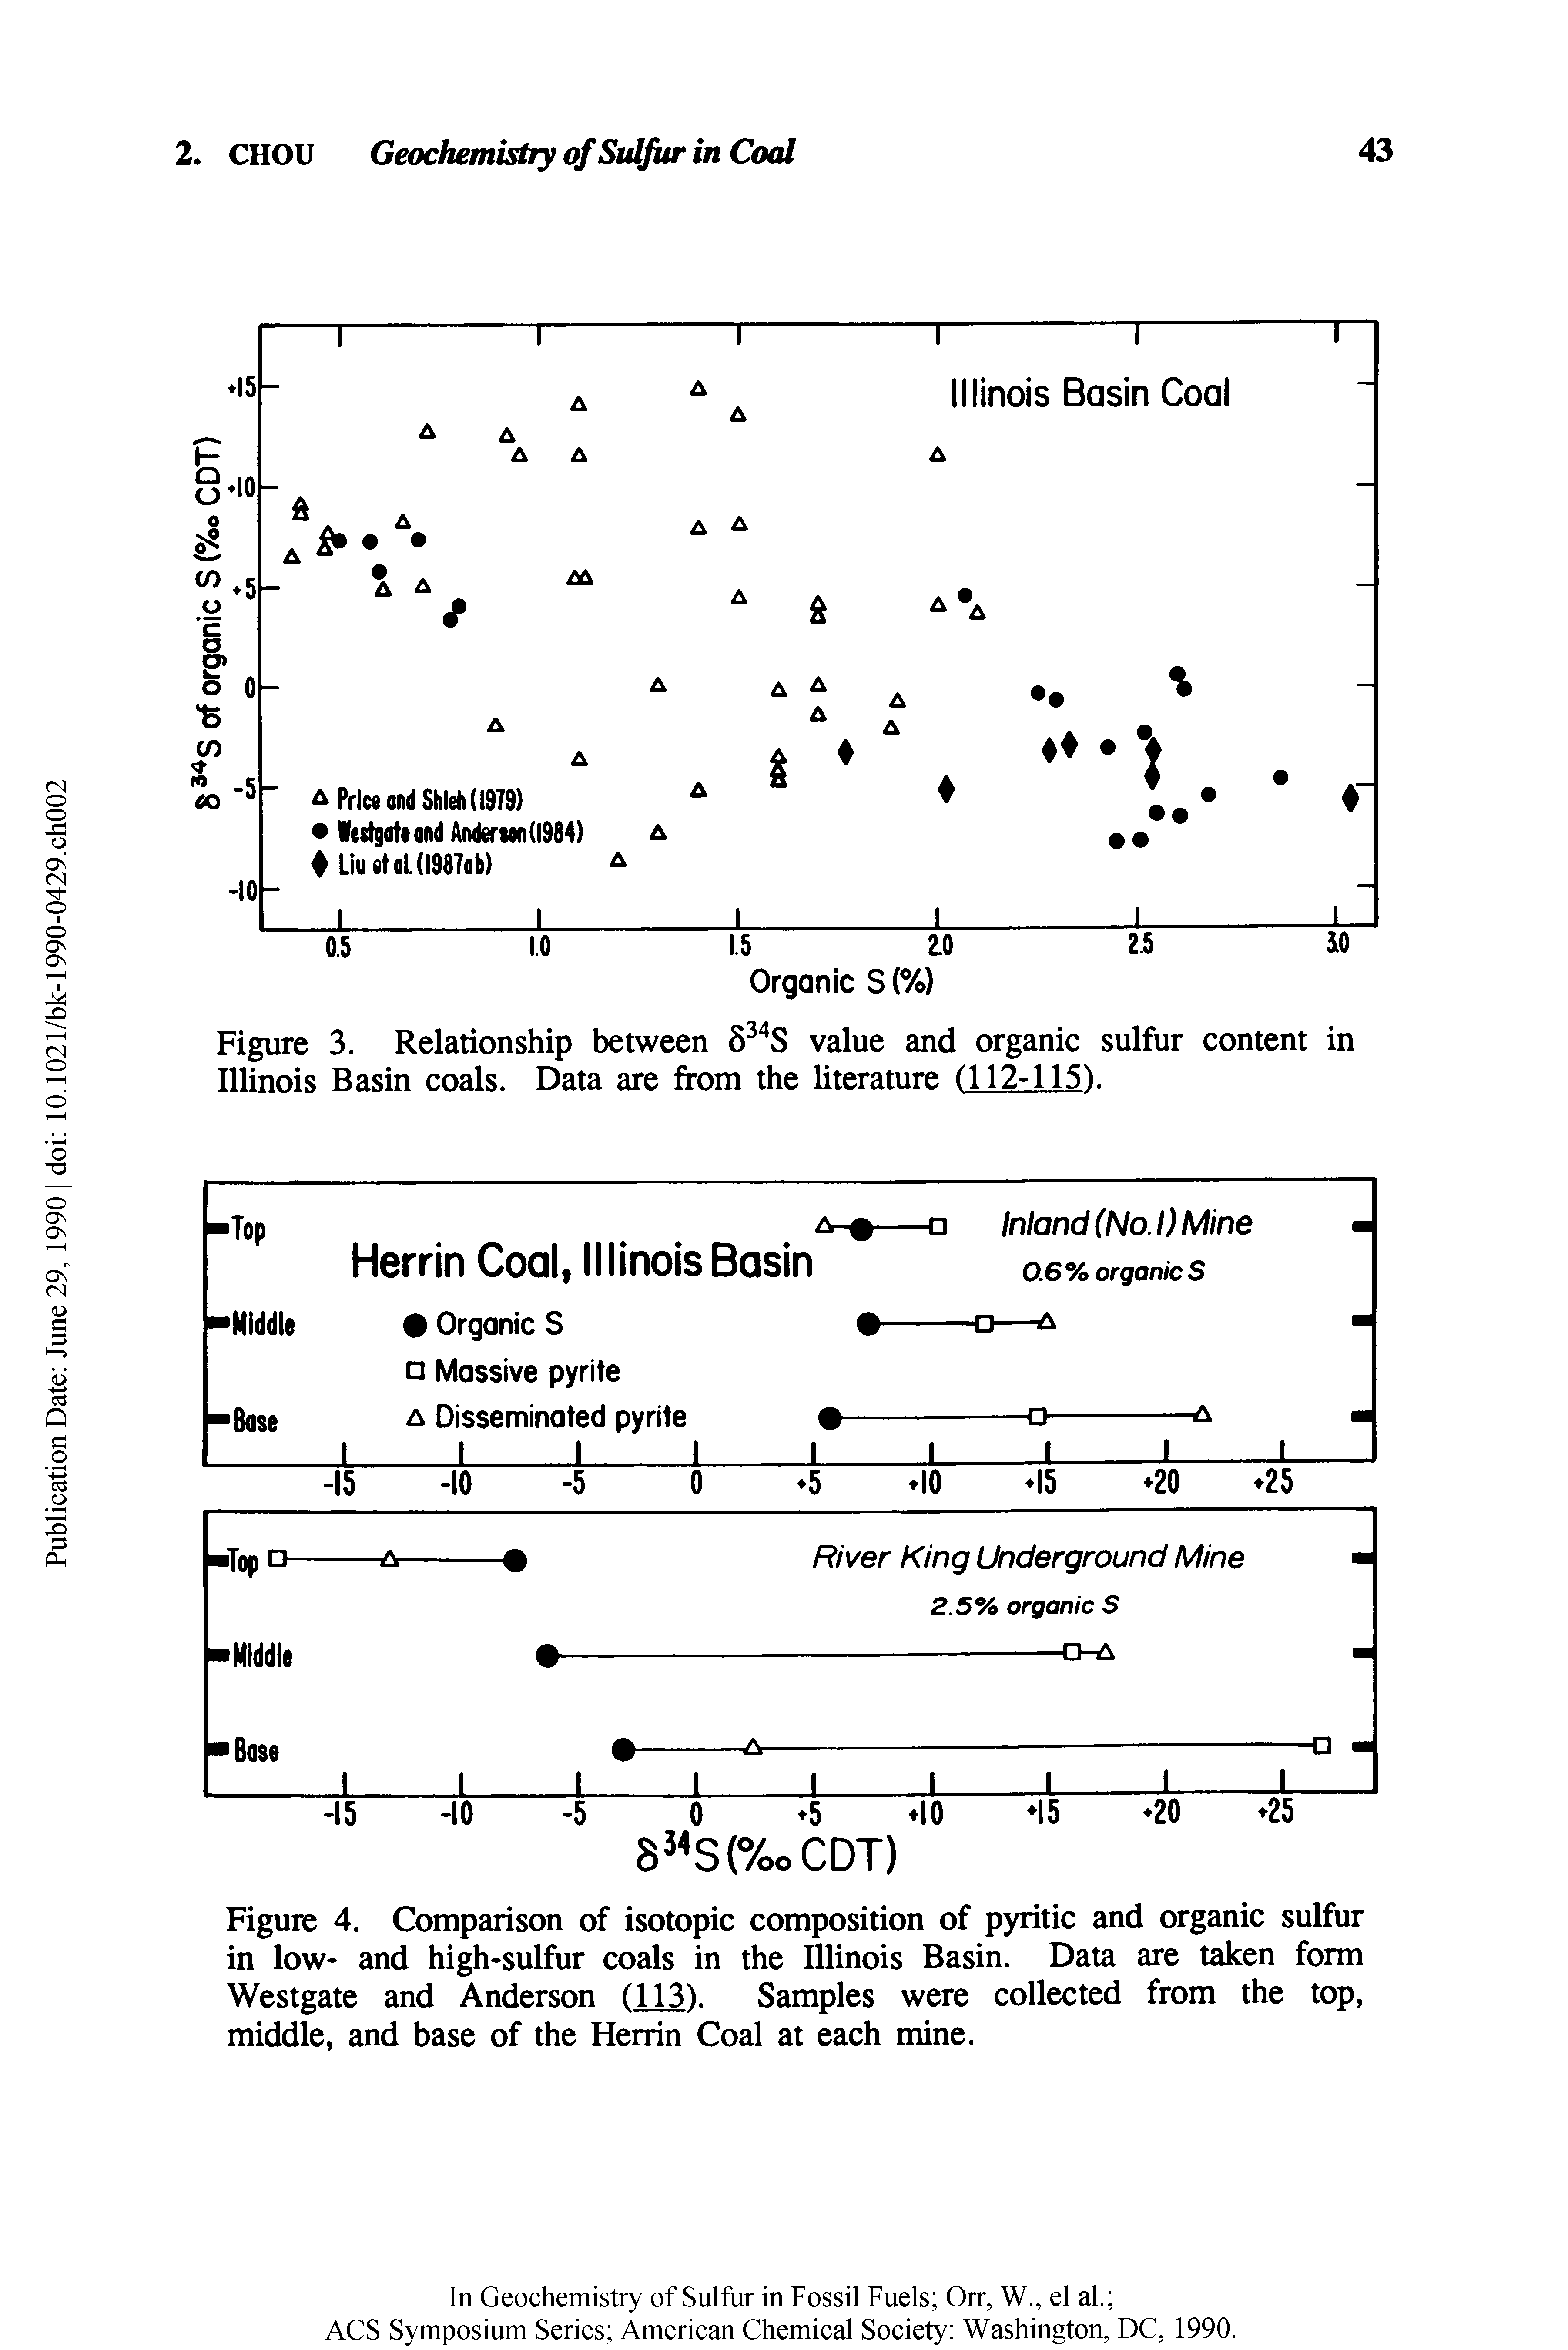 Figure 3. Relationship between 834S value and organic sulfur content in Illinois Basin coals. Data are from the literature (112-115).